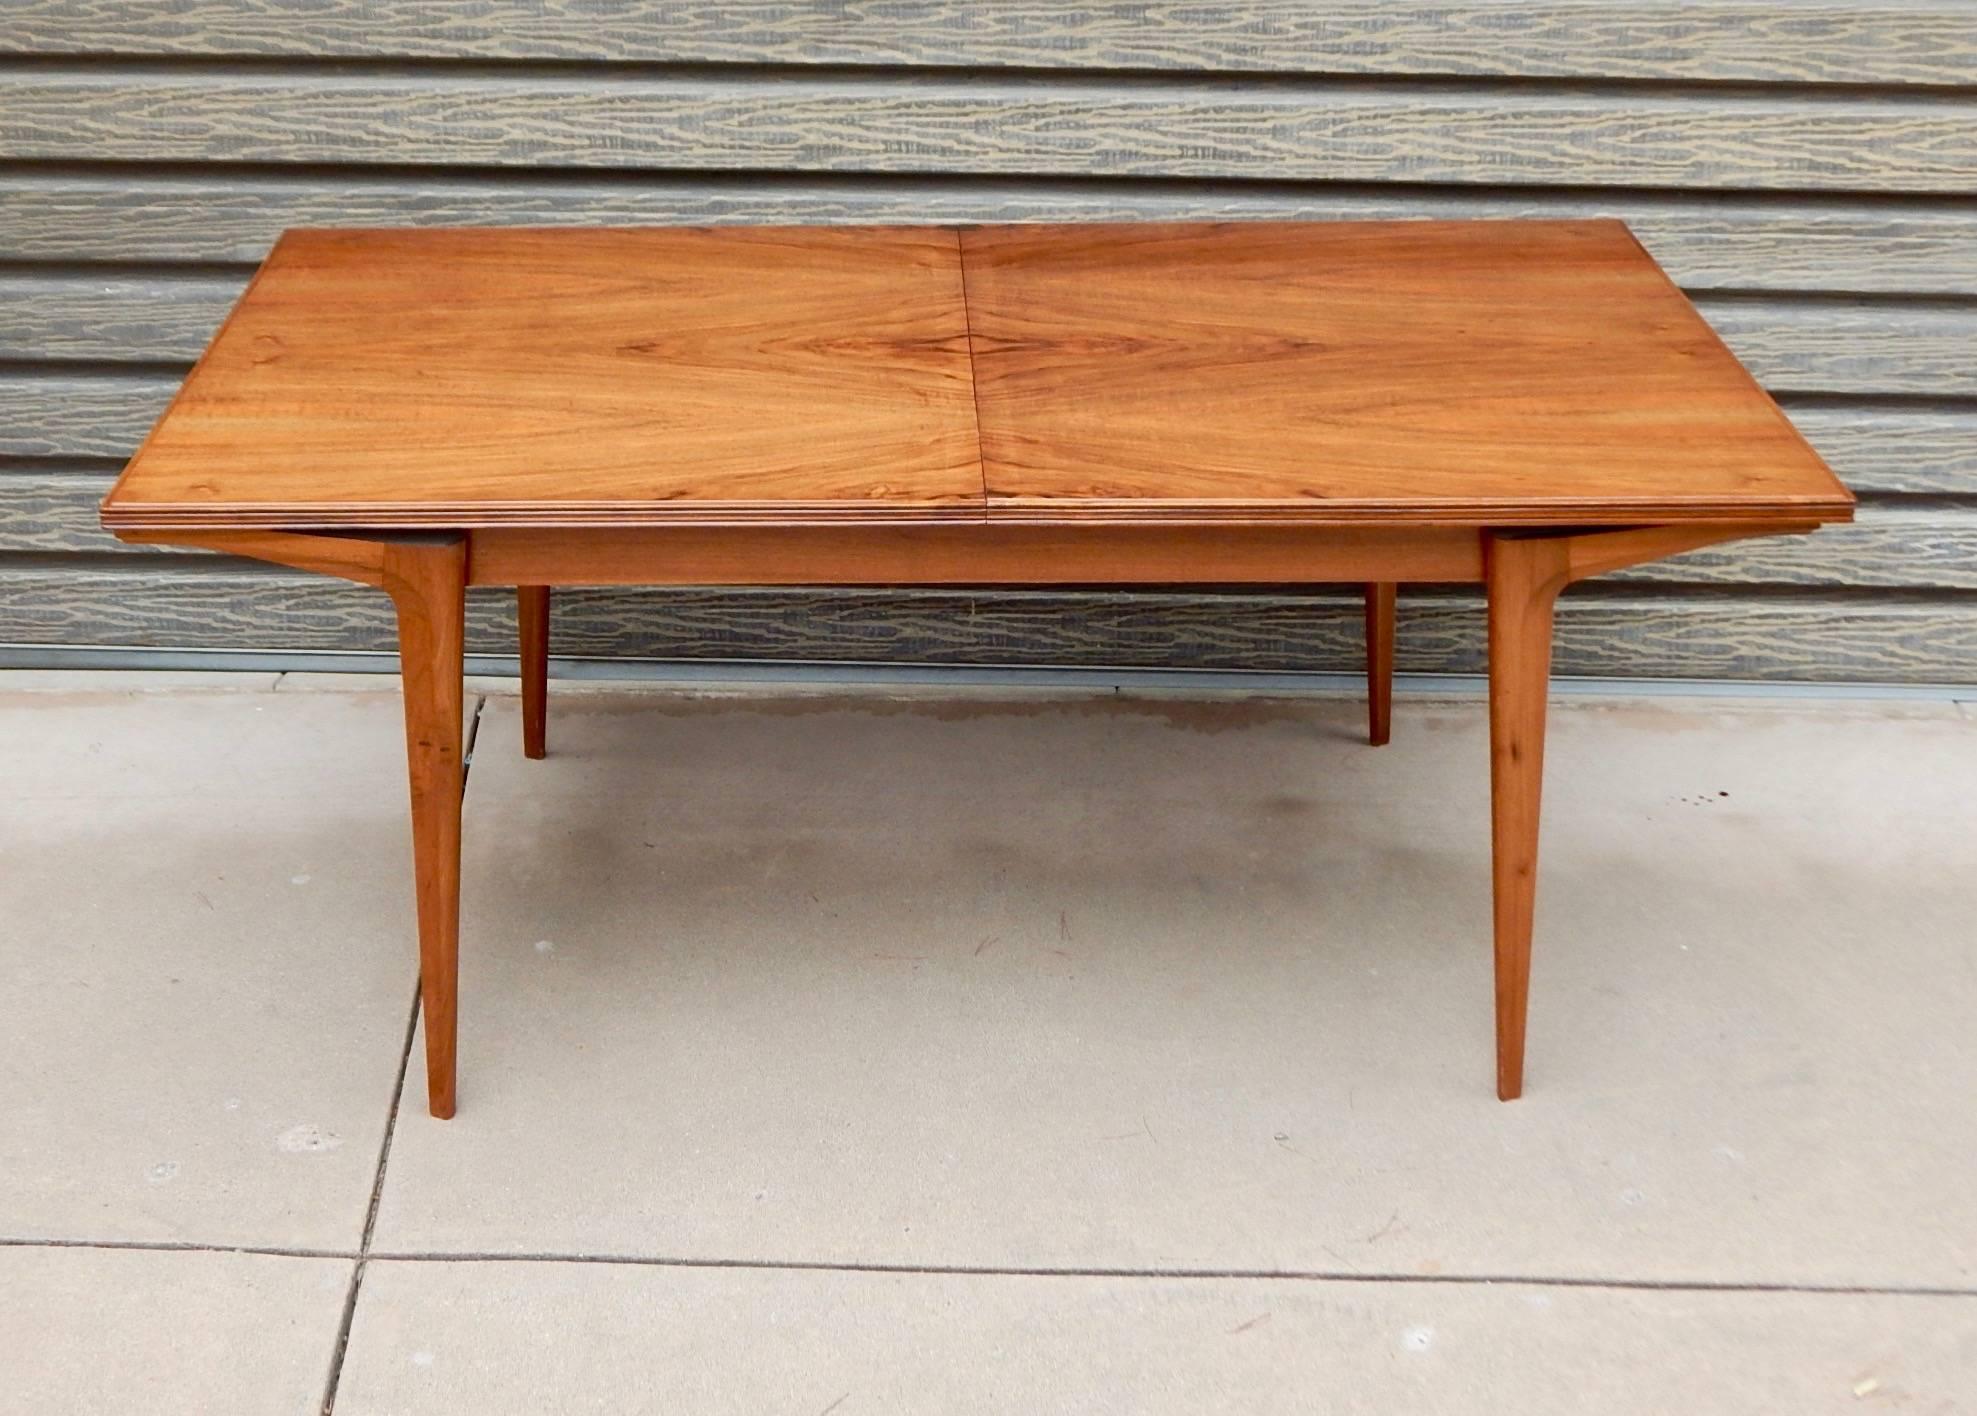 Argentine Mid-Century Modern extendable dining table rendered in highly figured walnut. The table has a concealed leaf which can be opened to extend this table to 83 inches. Restored and with some minor surface scratches. Please see photos for more